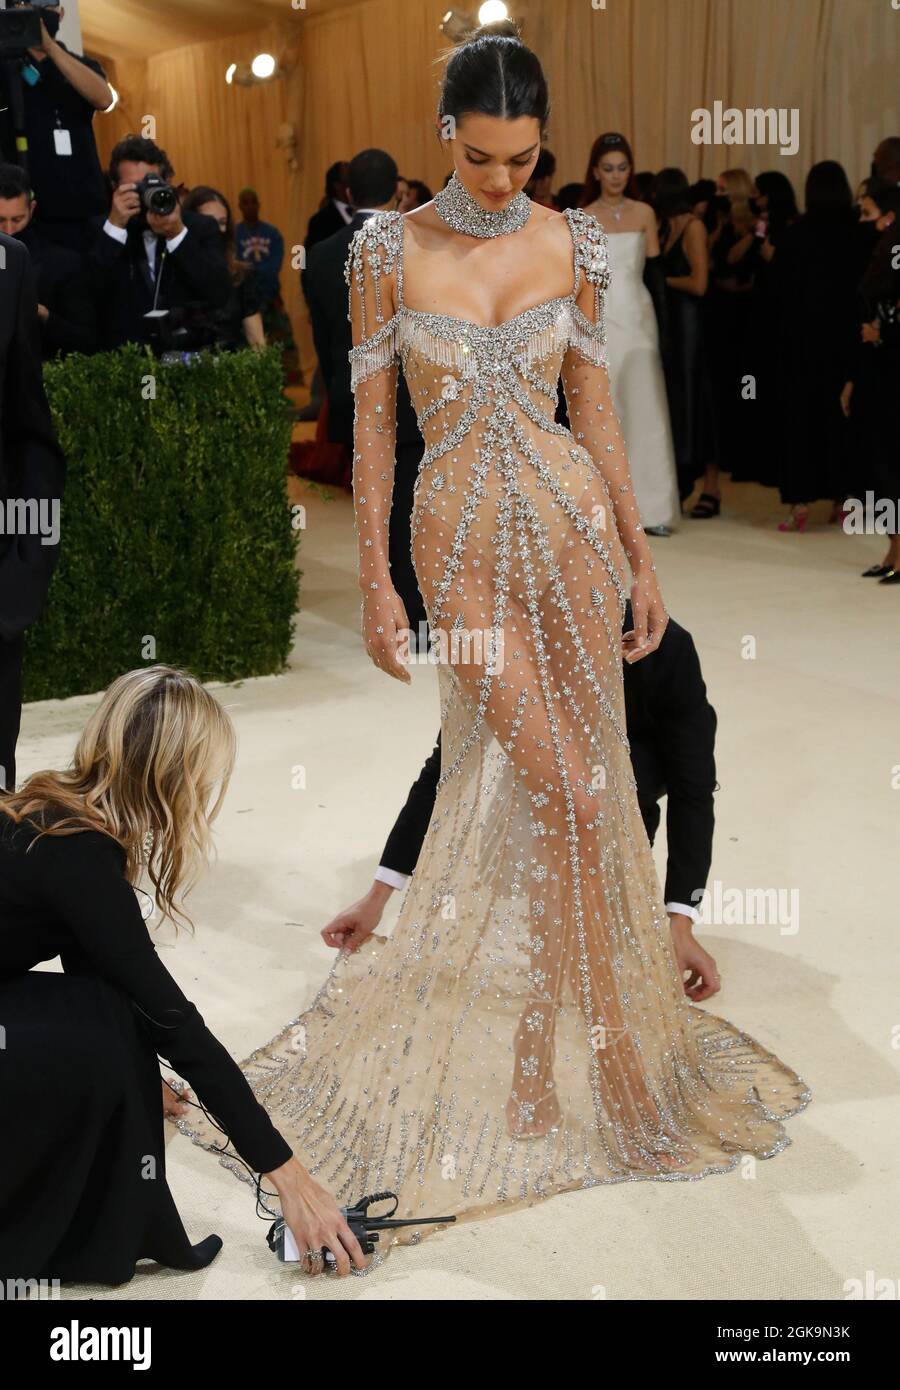 Metropolitan Museum of Art Costume Institute Gala - Met Gala - In America:  A Lexicon of Fashion - Arrivals - New York City, U.S. - September 13, 2021.  Kendall Jenner. REUTERS/Mario Anzuoni Stock Photo - Alamy